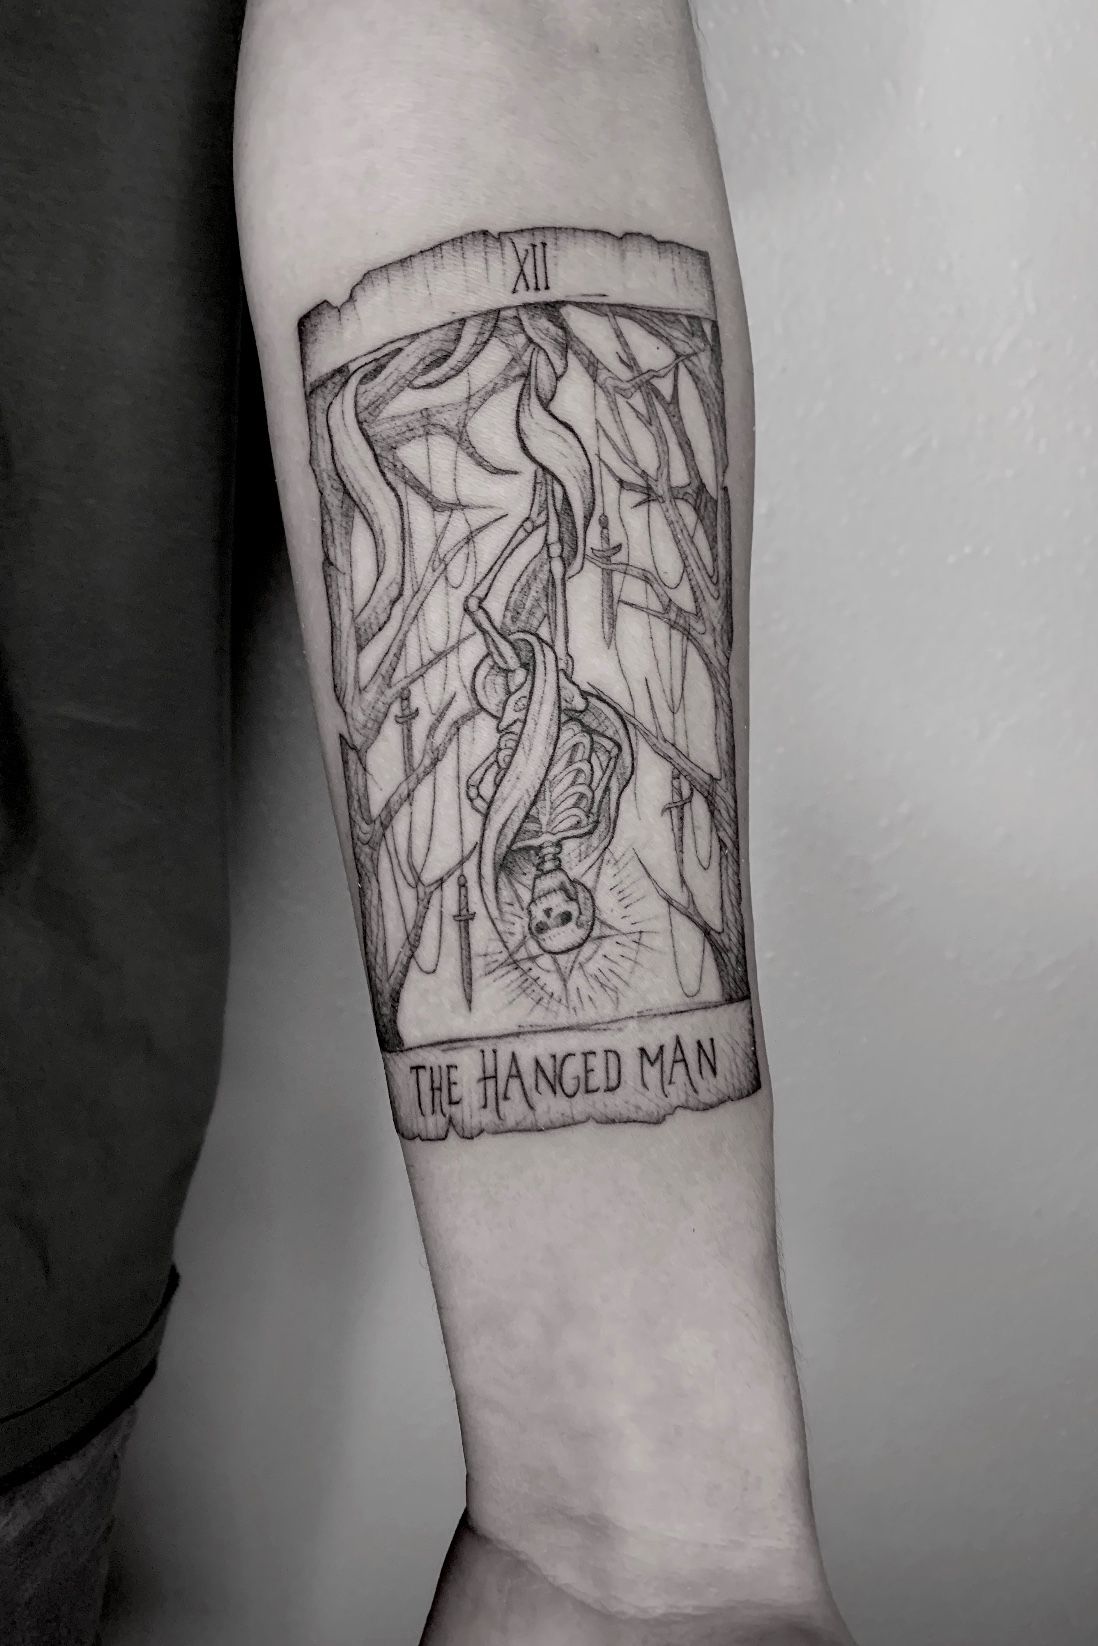 YANKEE TATTOO  Hanged Man tarot card by Anthony Audy  Facebook